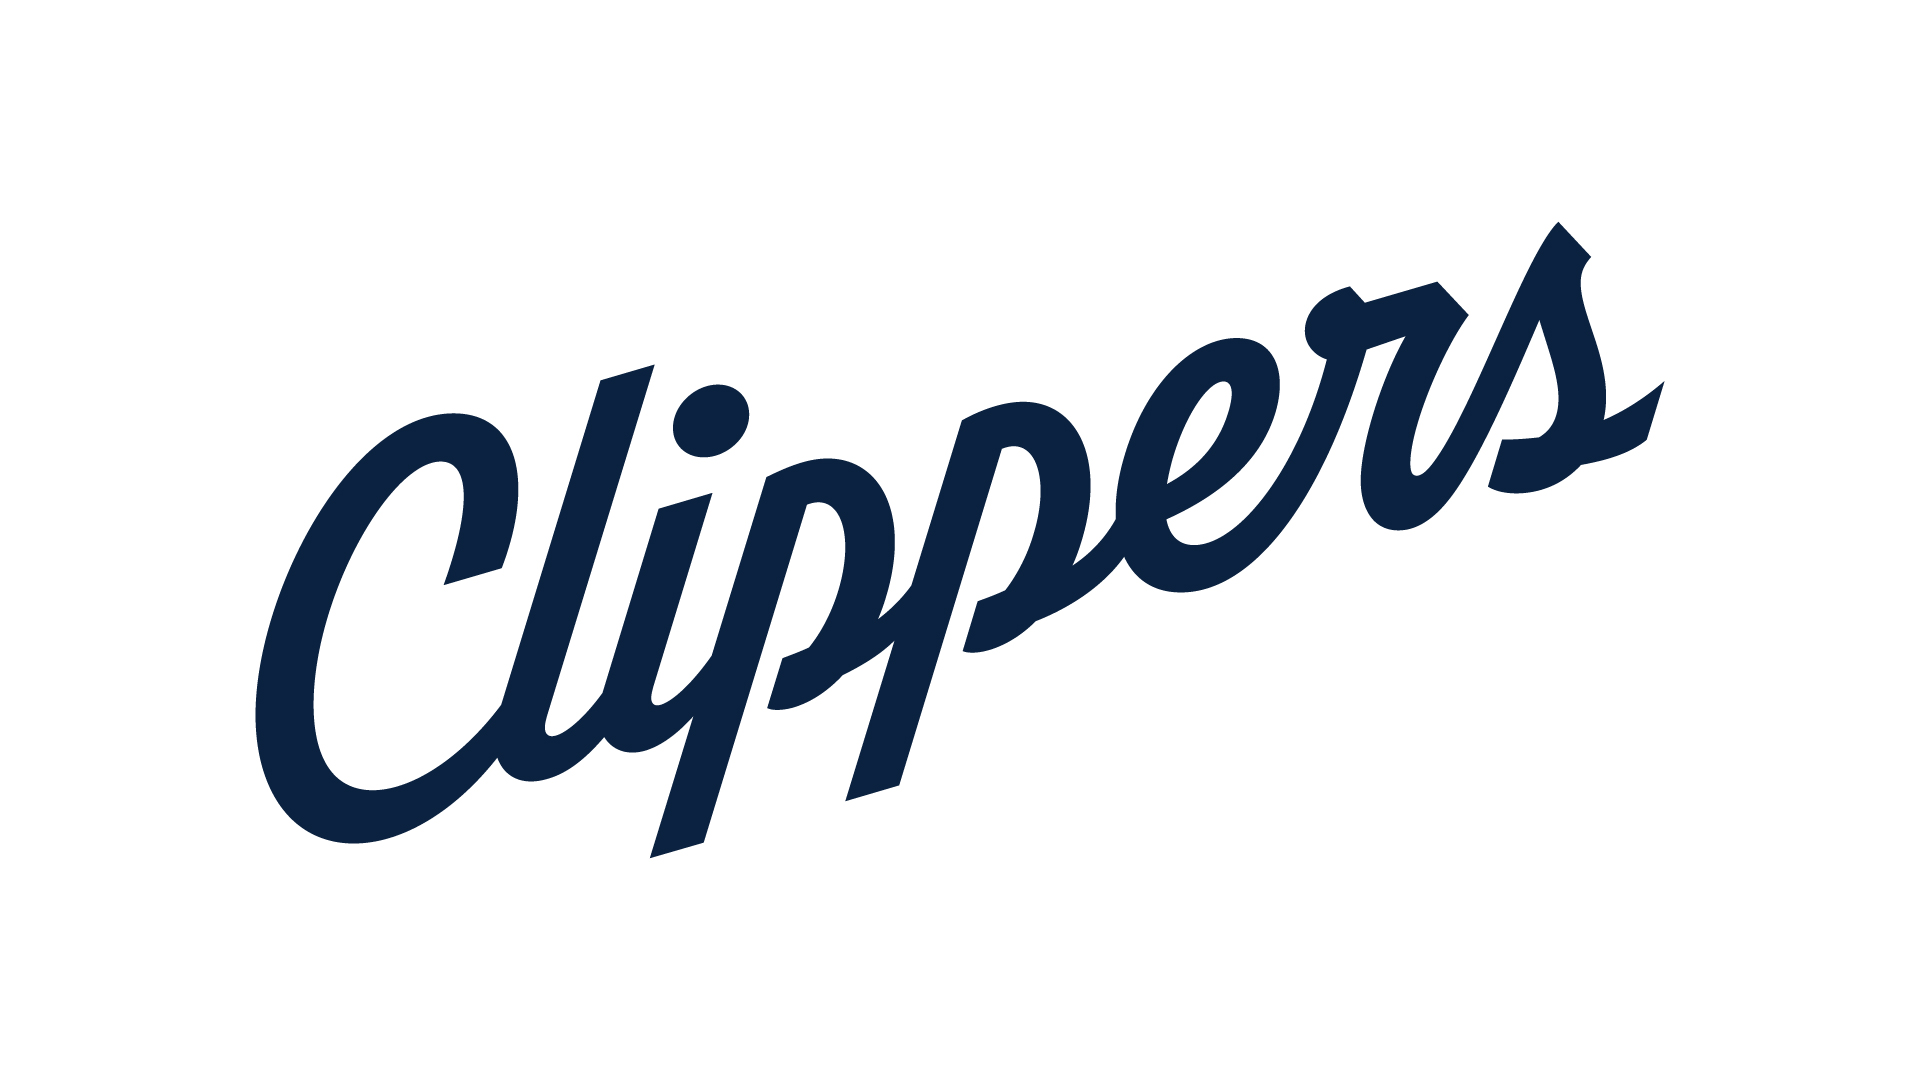 LAClippersTypography_Clippers_White_MatthewWolff